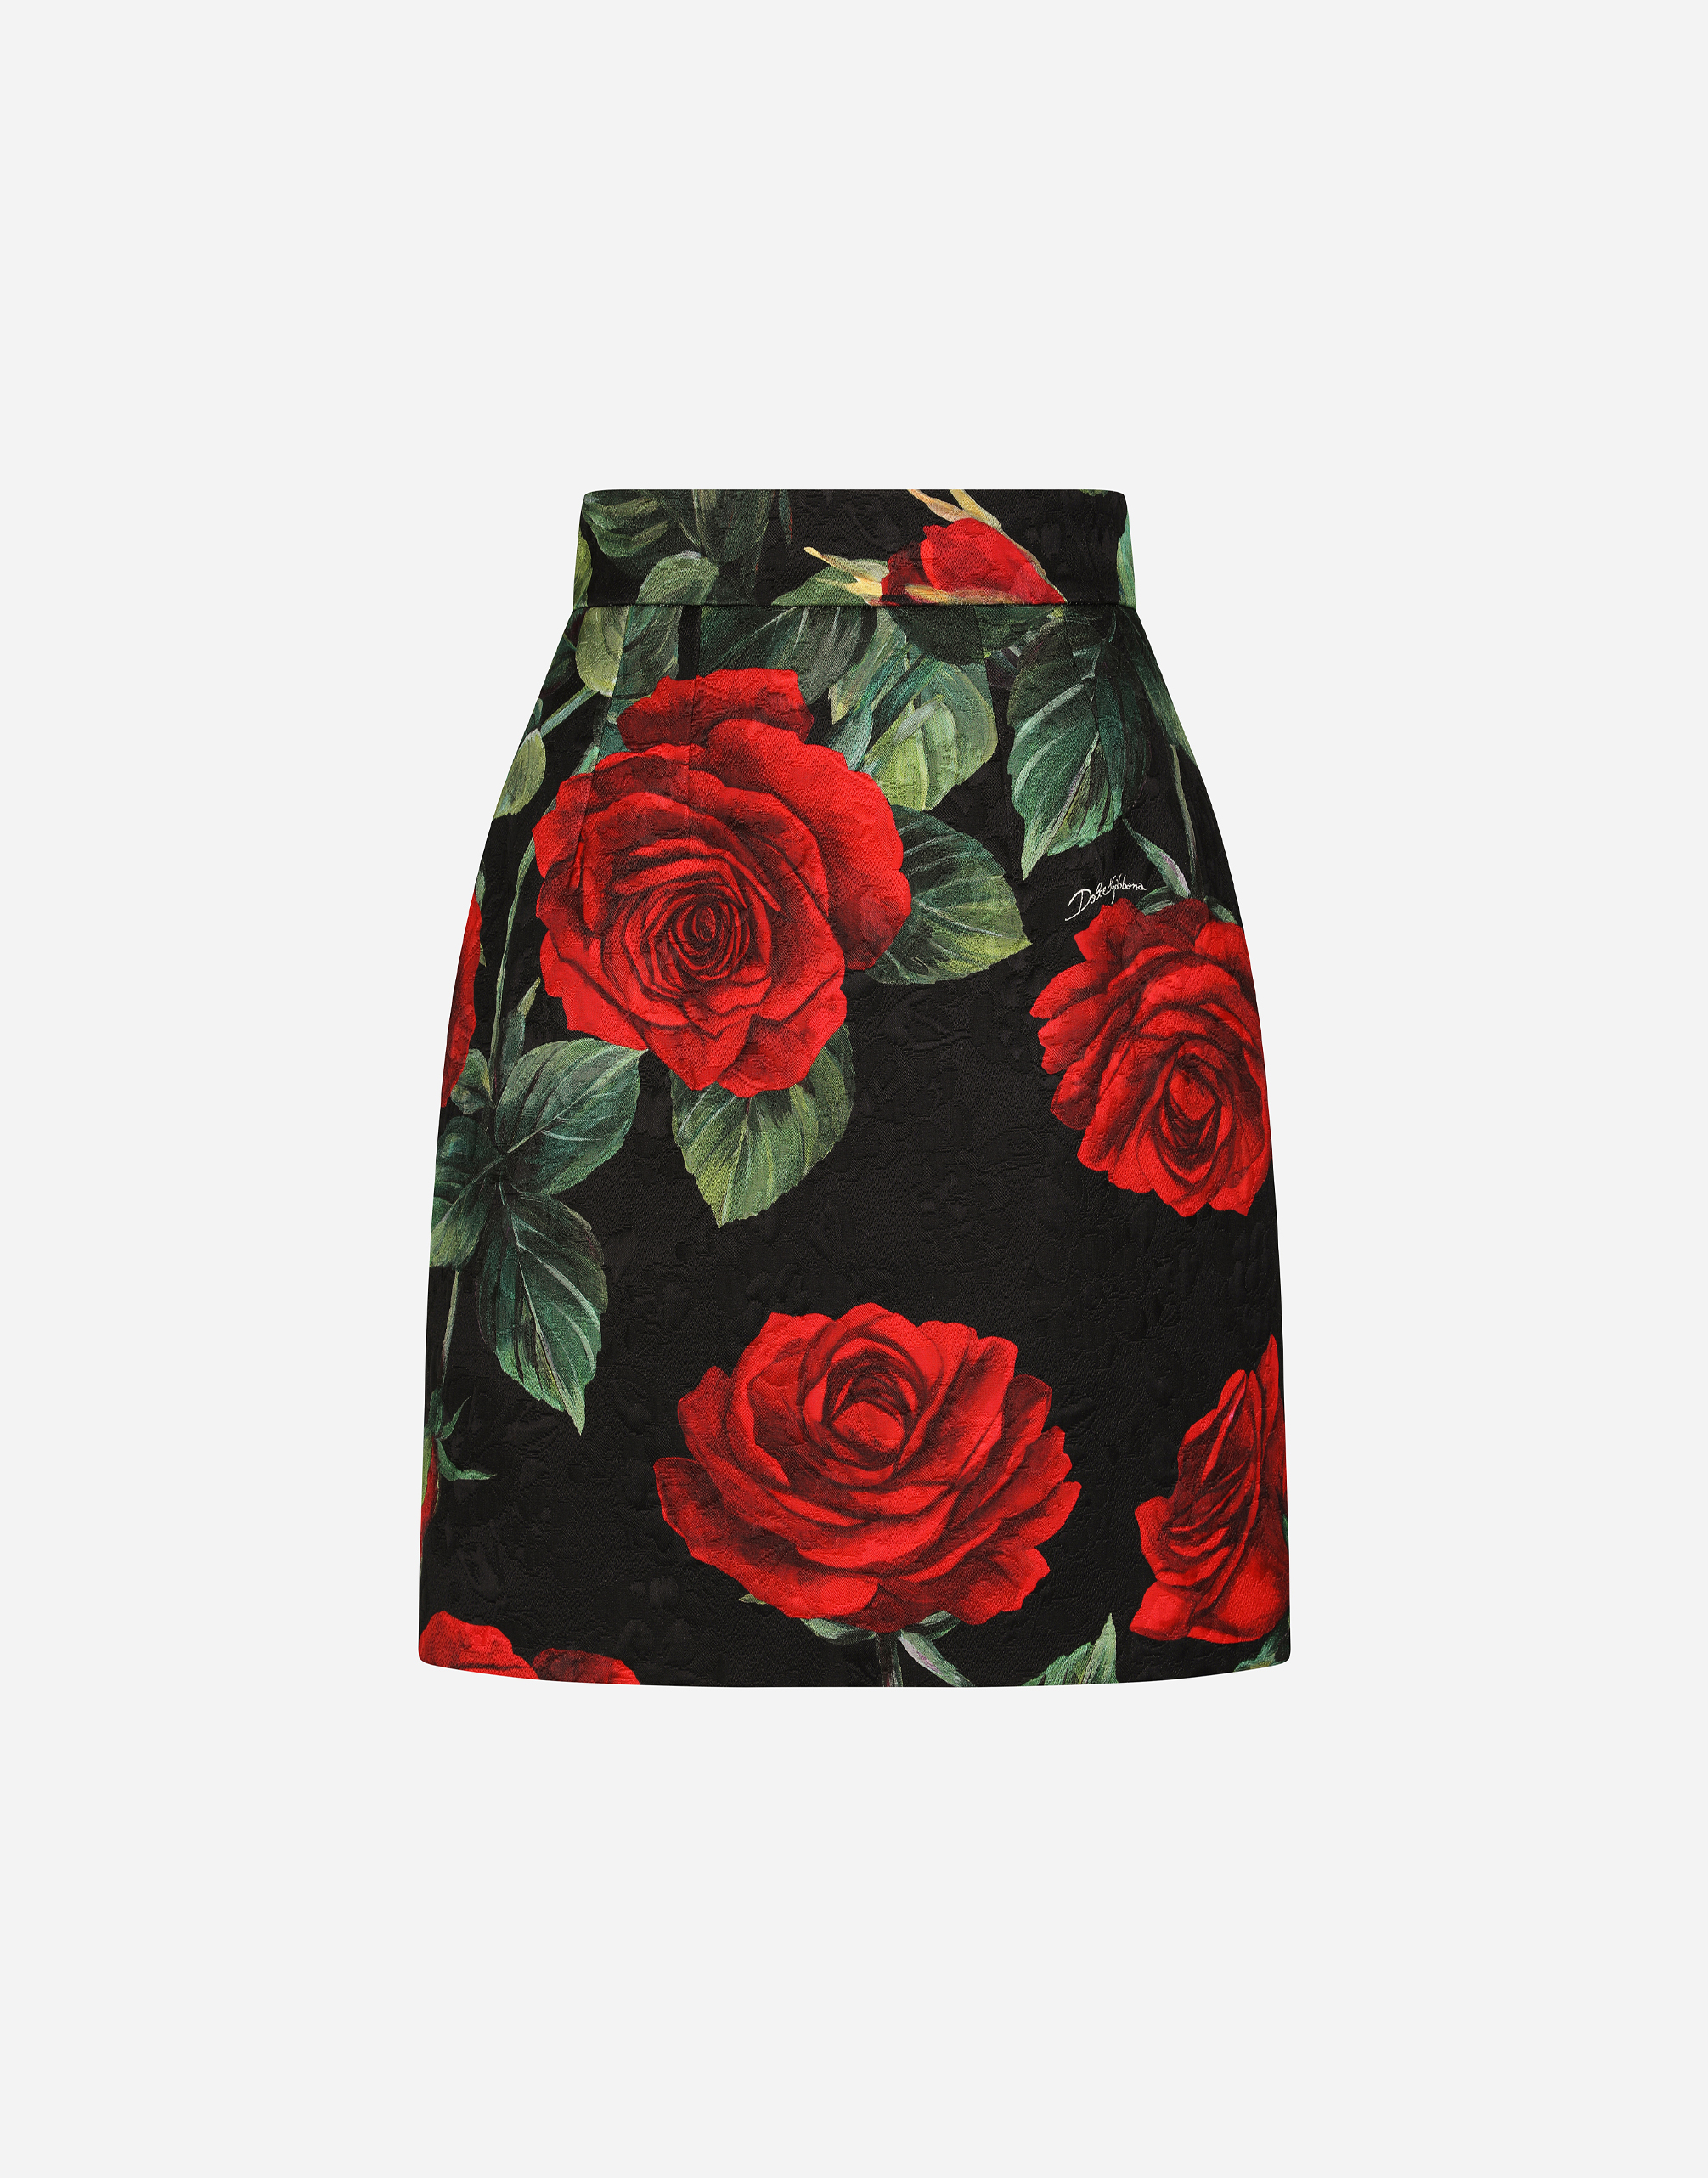 Brocade miniskirt with red rose print in Multicolor